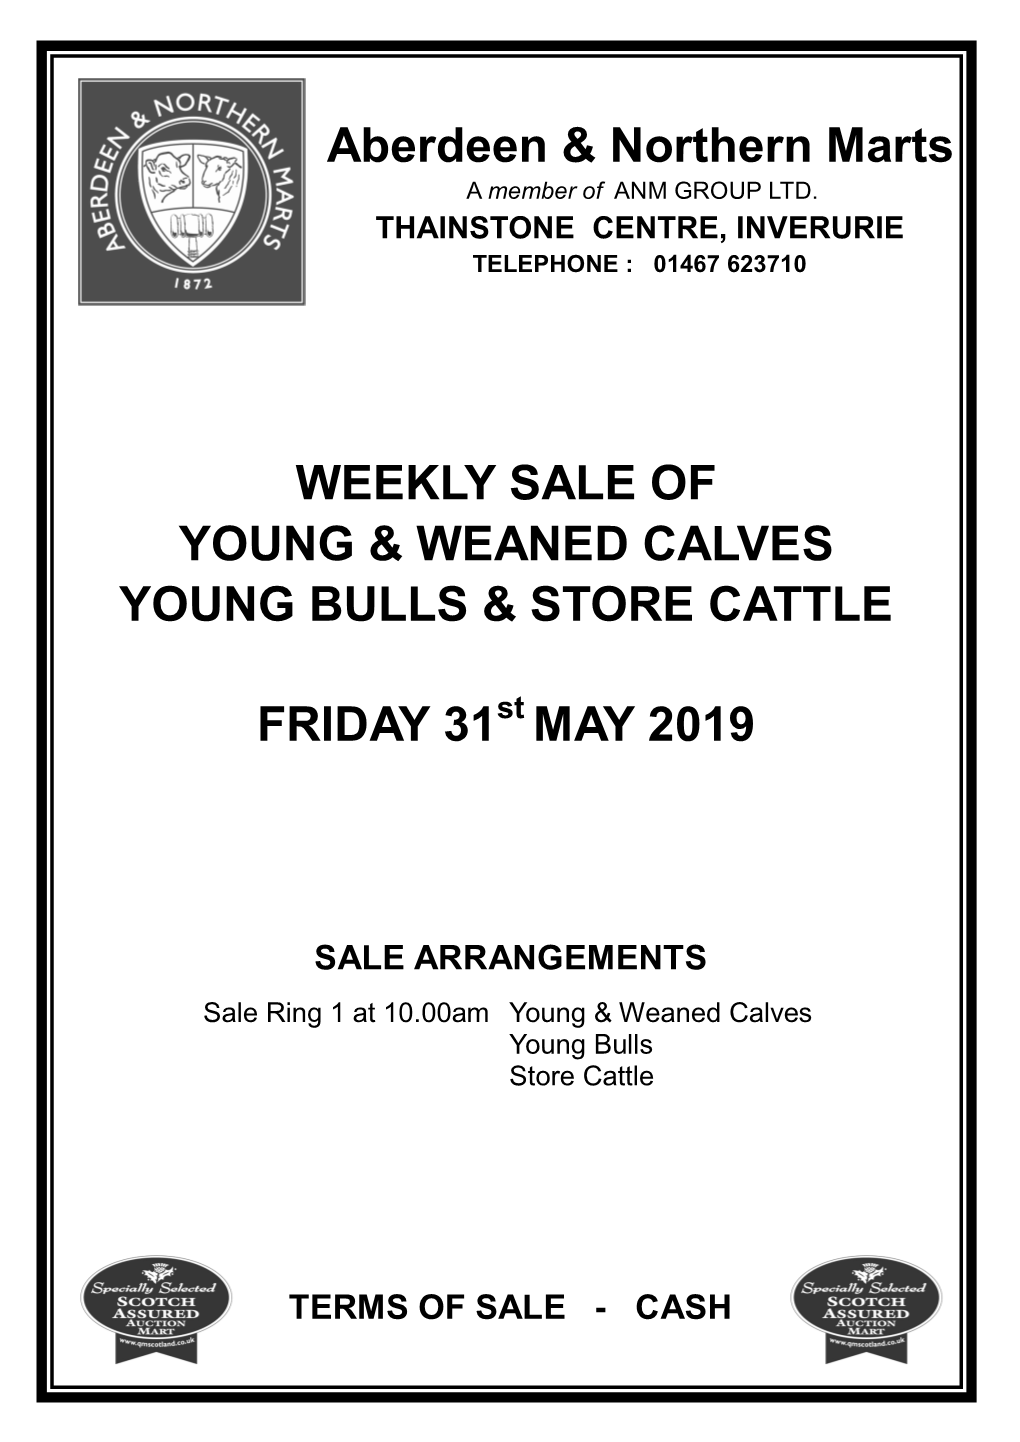 Aberdeen & Northern Marts WEEKLY SALE of YOUNG & WEANED